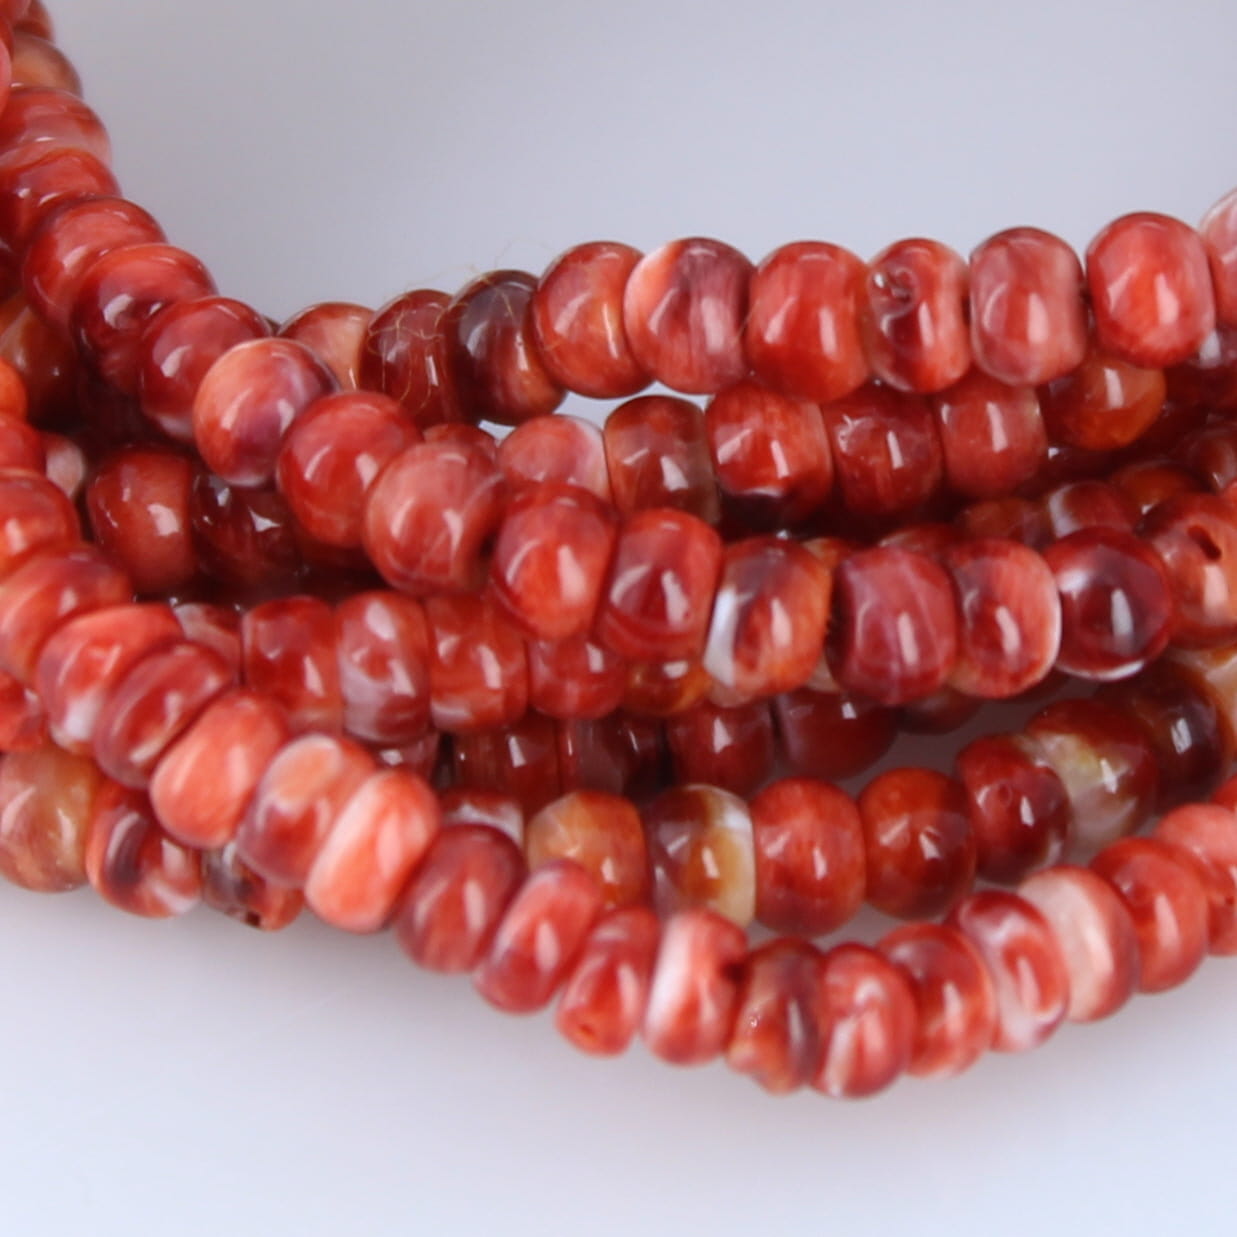 New DEEP RED SPINY Oyster Beads Rondelles 4mm 16"